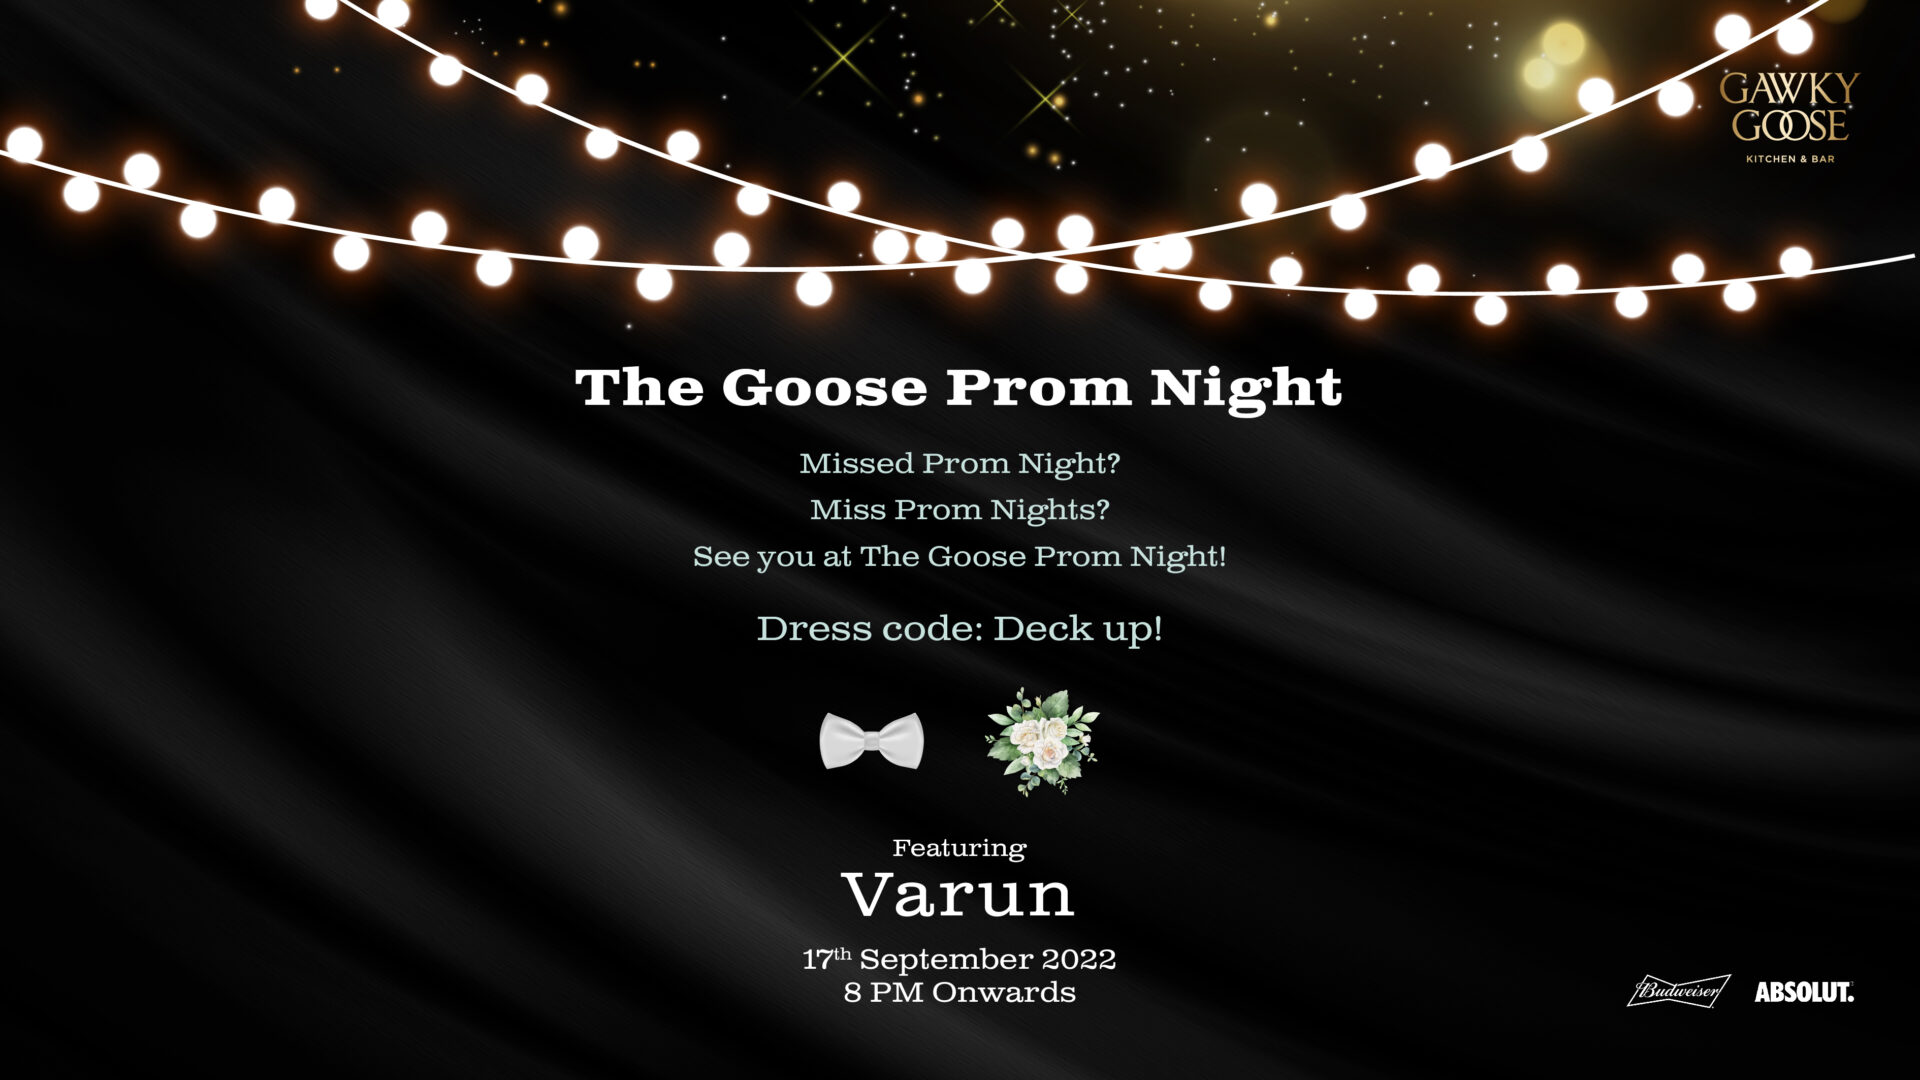 The Goose Prom Night - 17th September